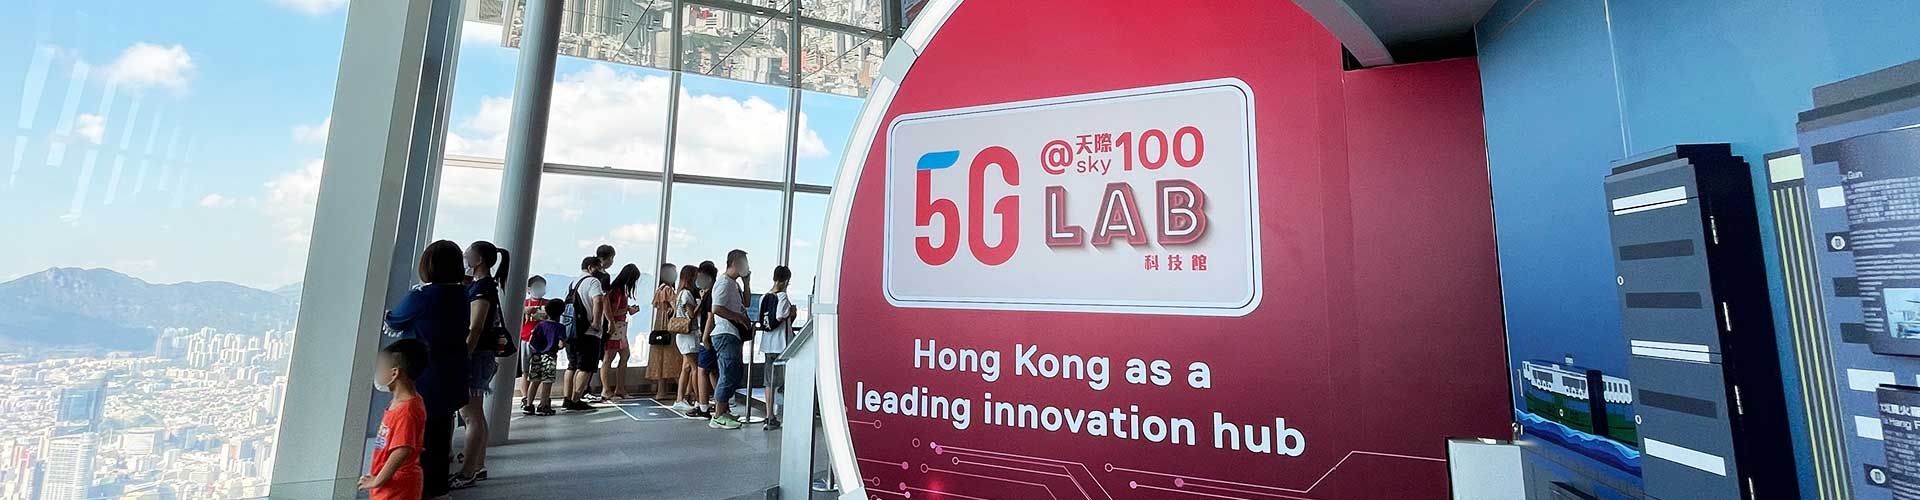 The purpose of the Lab is to promote the 5G developments to the public and introduce how the 5G infrastructure will support Hong Kong to become a smart city and a digital hub. The event will last for 2 months from 5 May 2021.